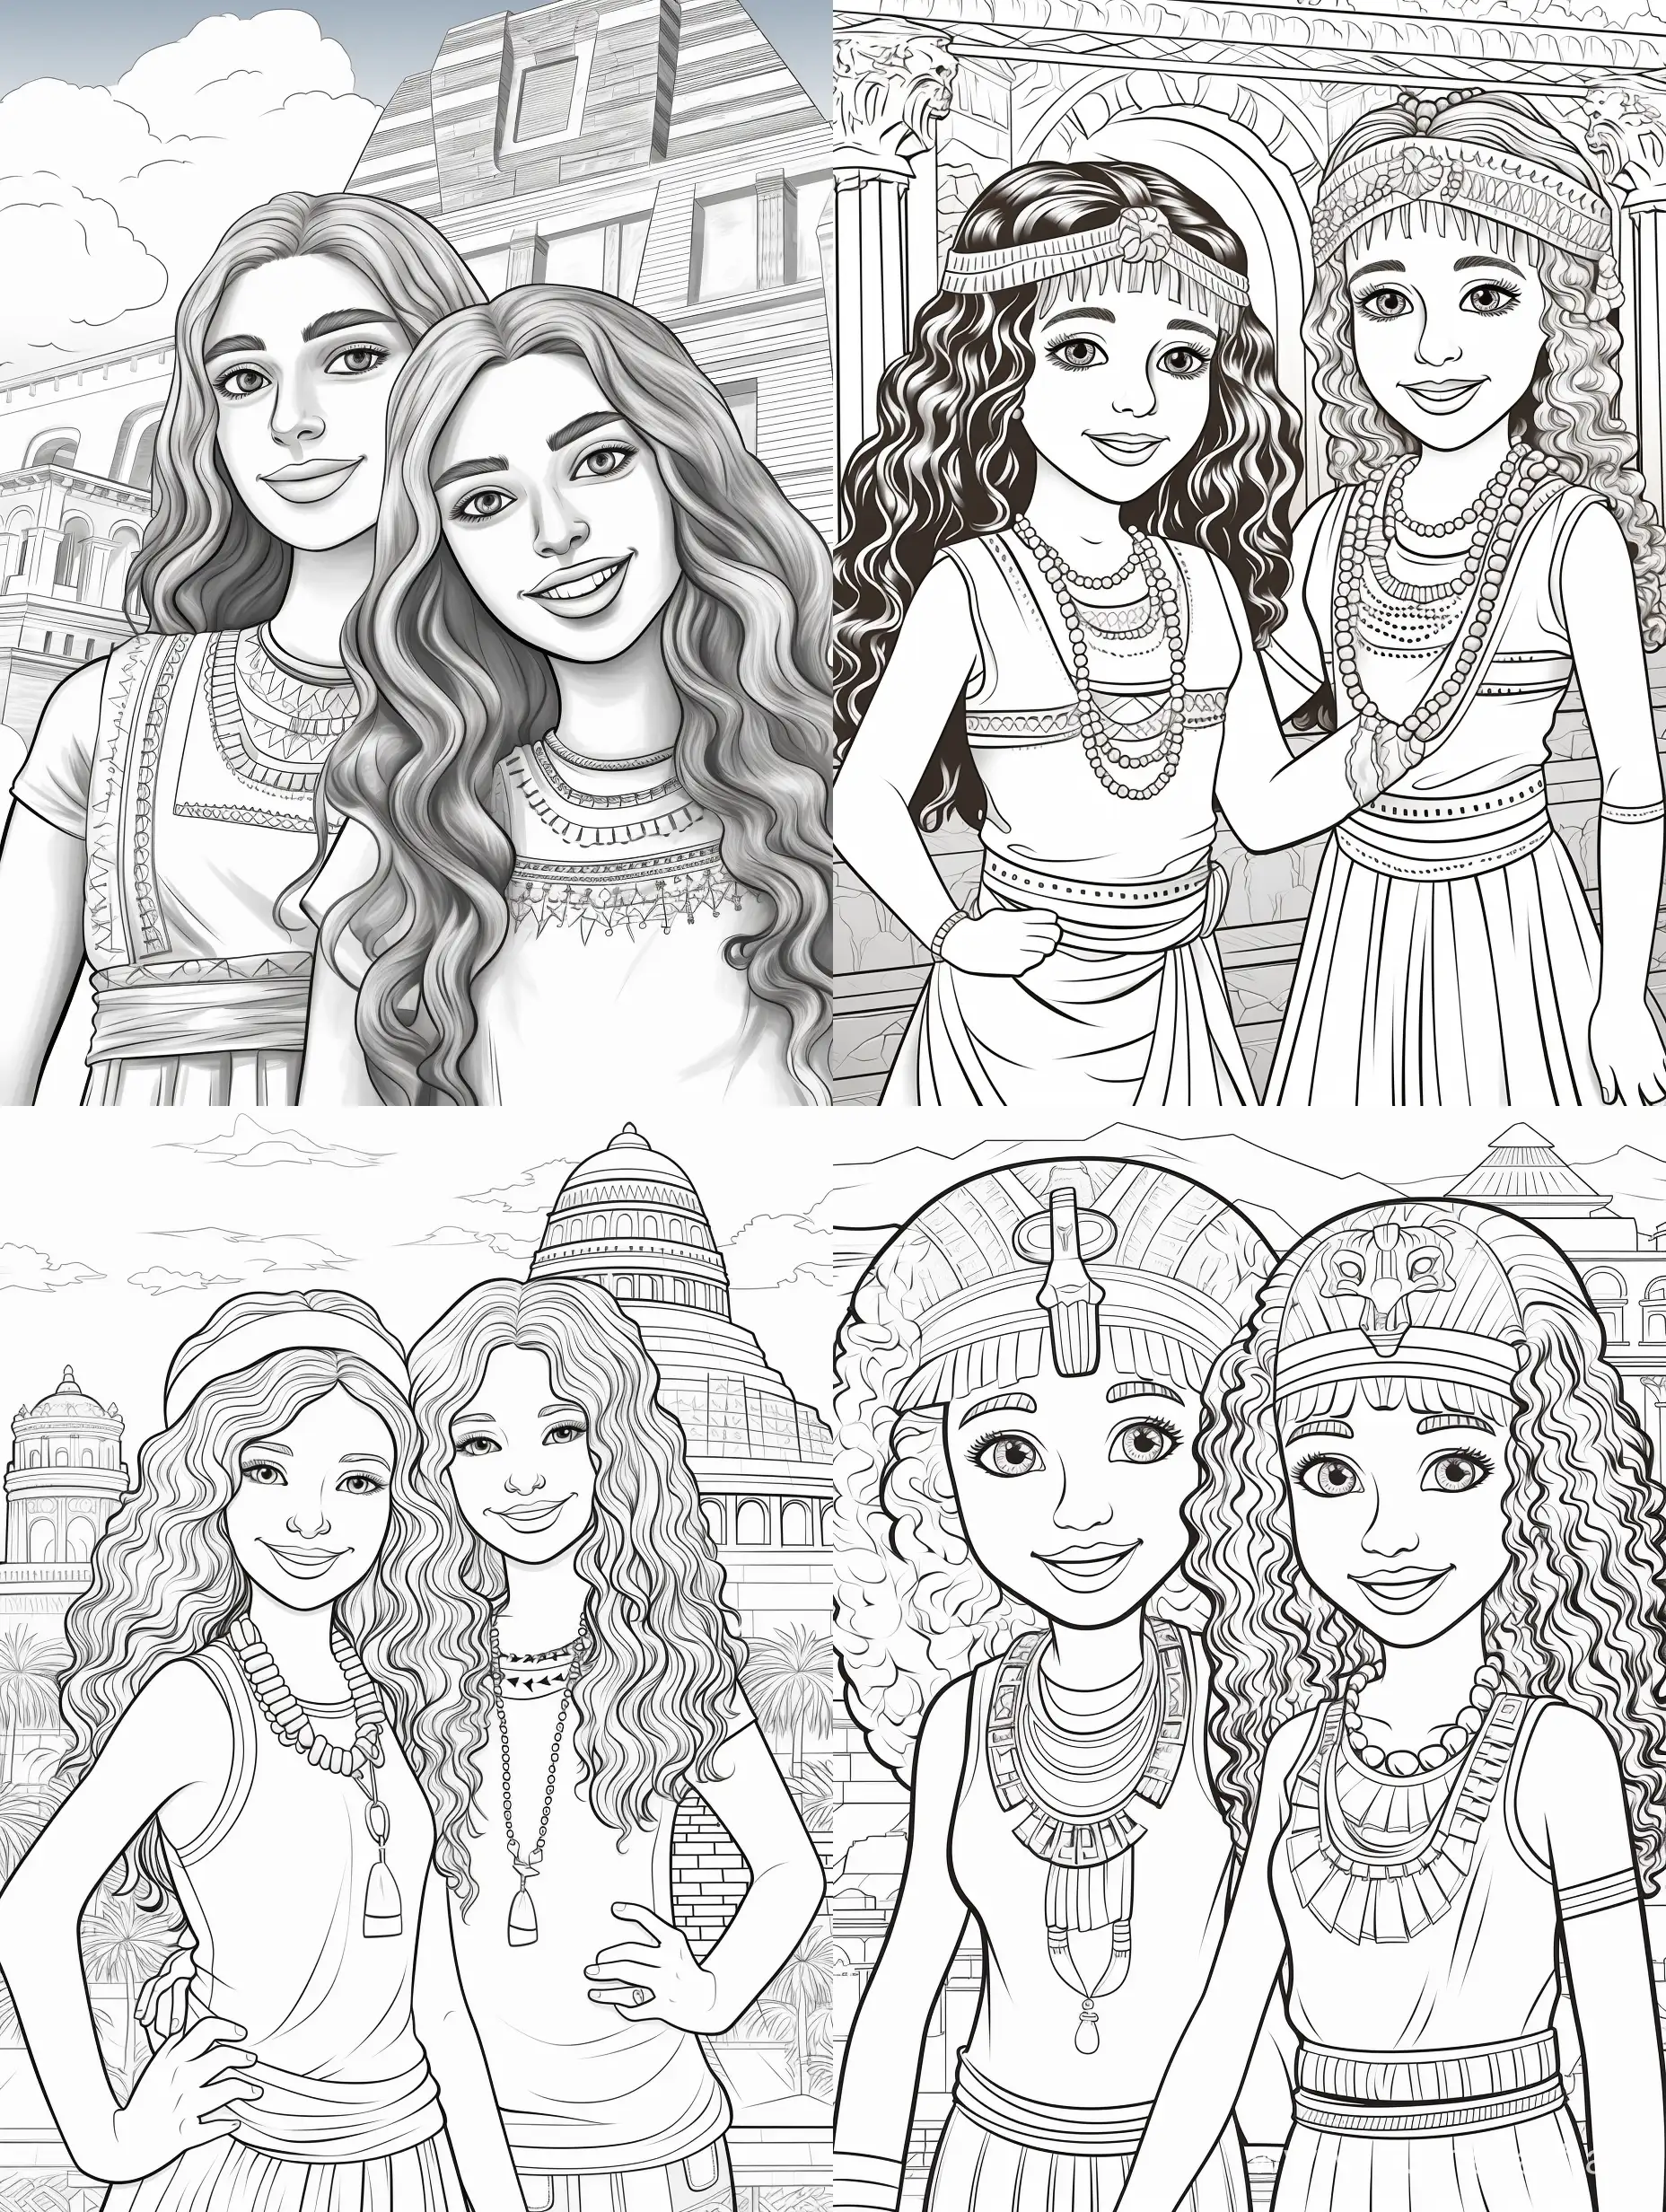 Joyful-Cartoon-Friends-Exploring-Everyday-Life-in-Egypt-Coloring-Page-for-Children